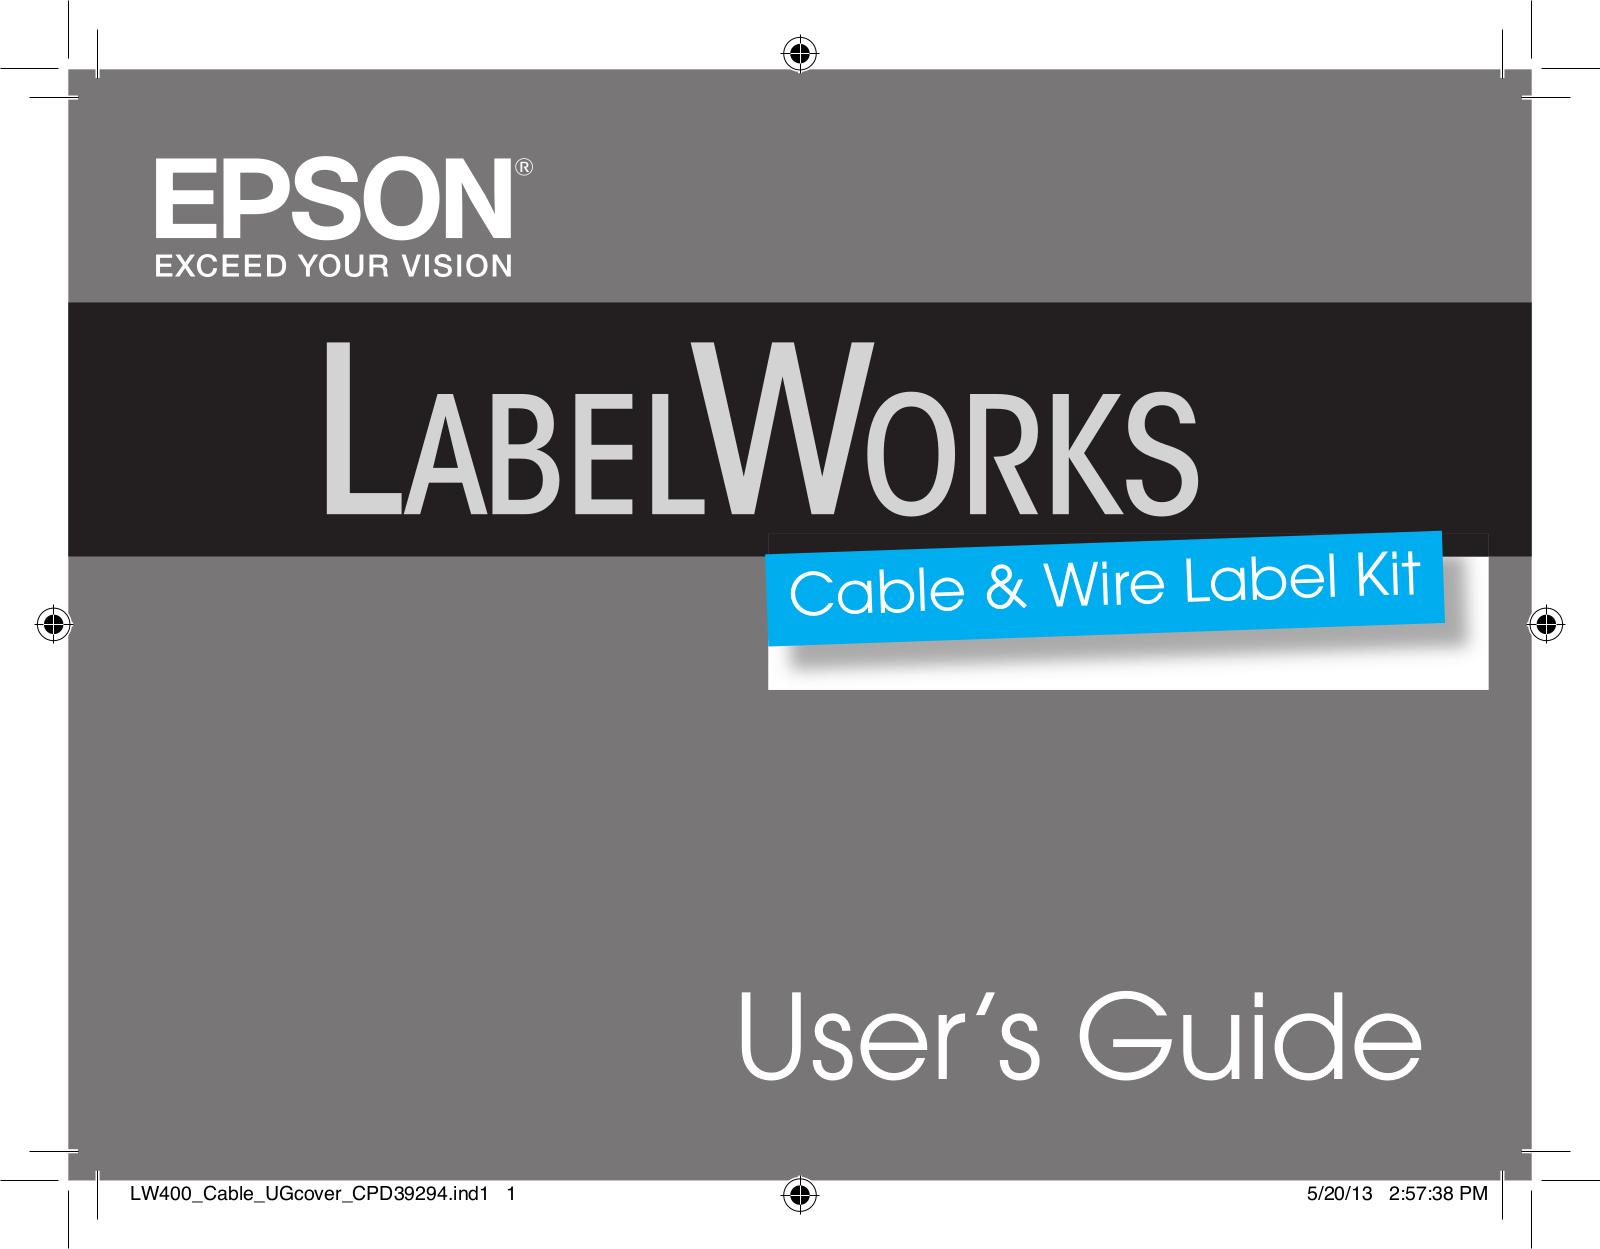 Epson LabelWorks Cable and Wire Kit, LabelWorks Cable and Wiring Kit Owner's Manual